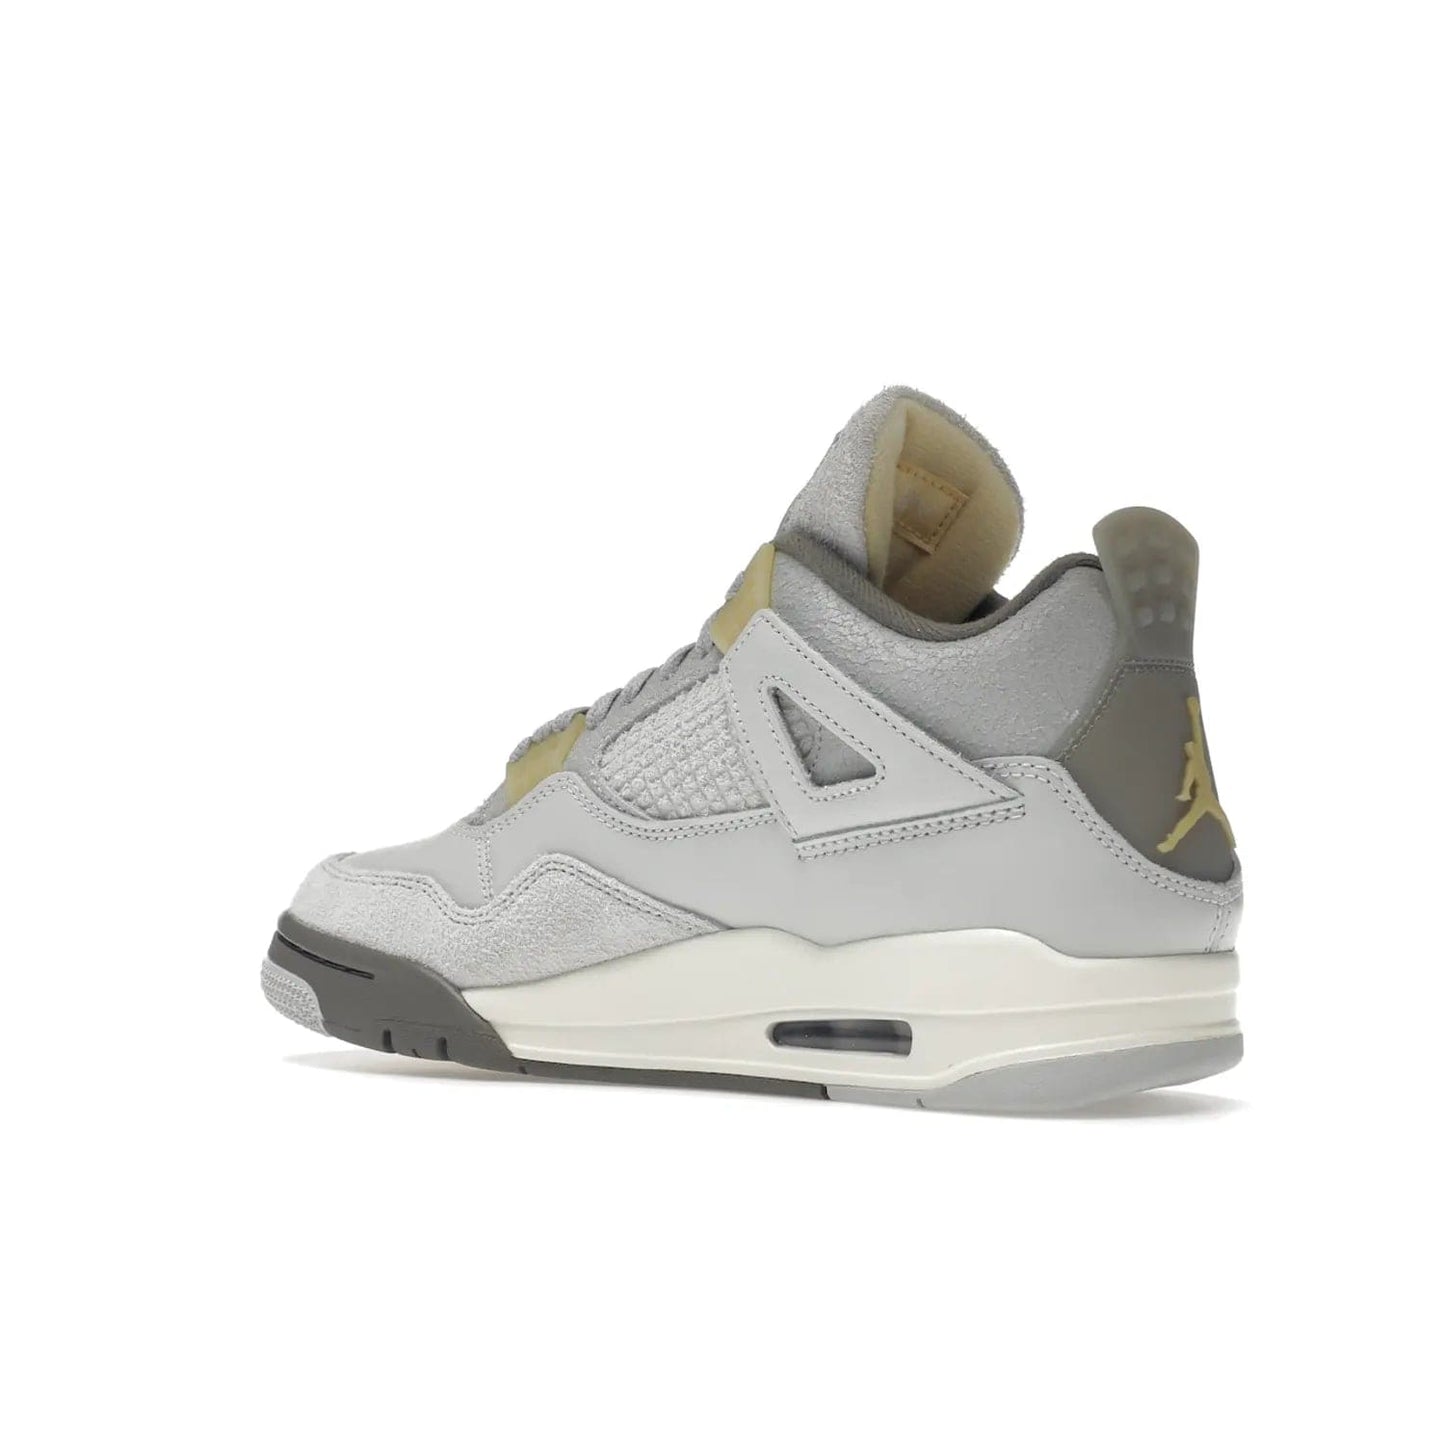 Jordan 4 Retro SE Craft Photon Dust - Image 23 - Only at www.BallersClubKickz.com - Upgrade your shoe collection with the Air Jordan 4 Retro SE Craft Photon Dust. This luxurious sneaker features a combination of suede and leather with unique grey tones like Photon Dust, Pale Vanilla, Off White, Grey Fog, Flat Pewter, and Sail. Available February 11, 2023.